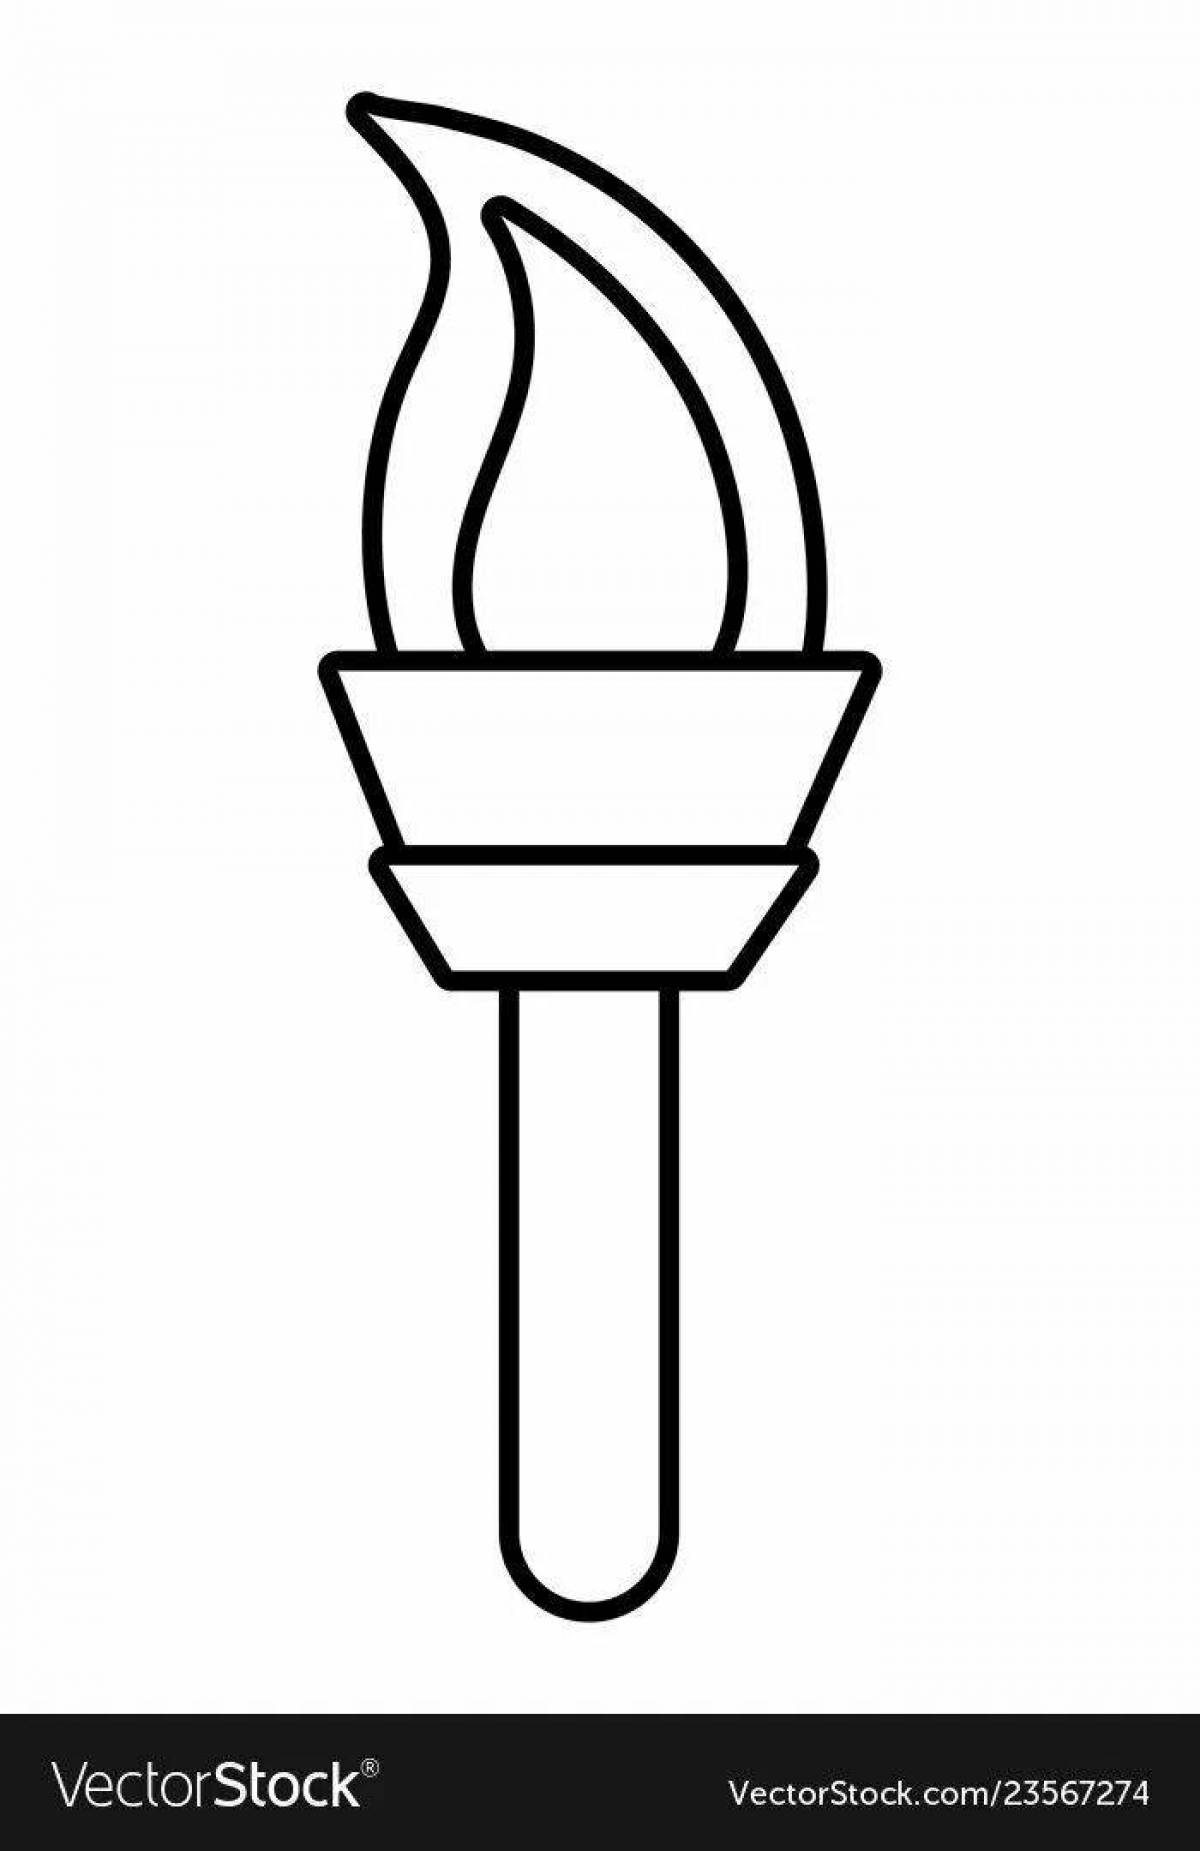 Sparkling Olympic flame coloring page